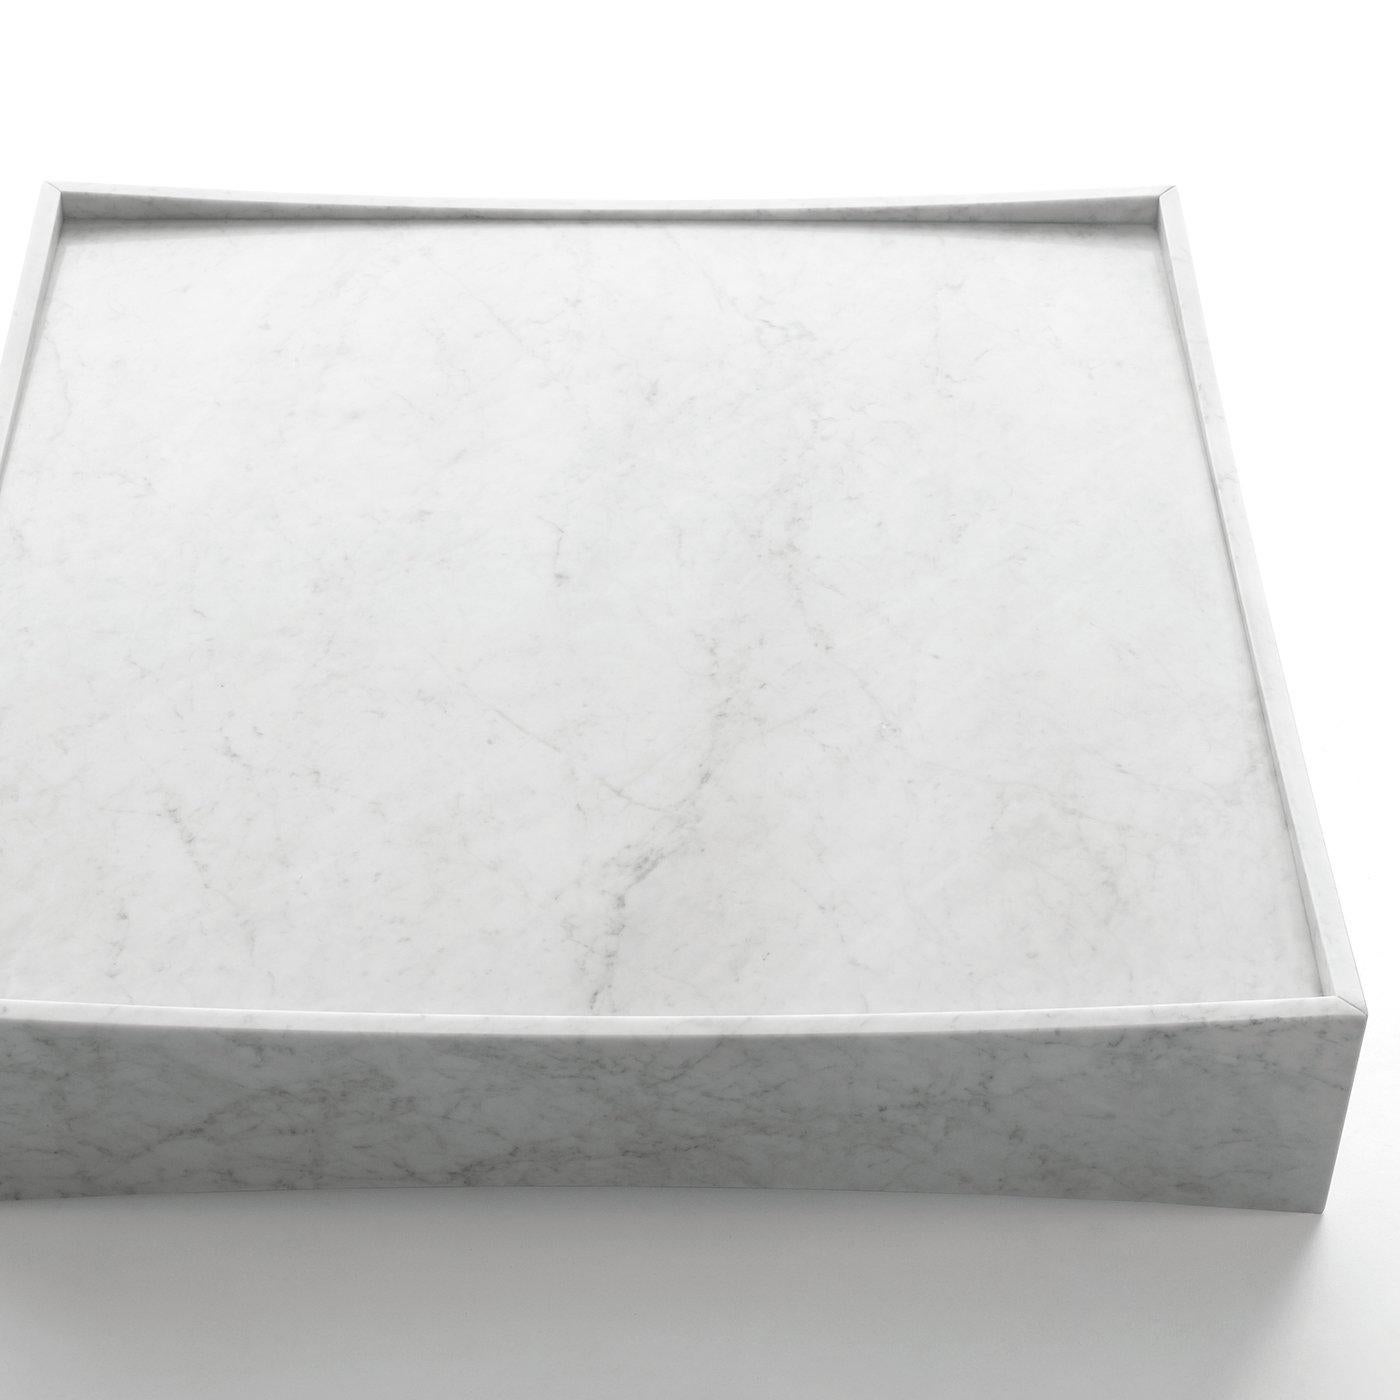 Low table, square, in white Carrara marble, matte polished finish also available in black Marquina marble, matte polished finish.
 